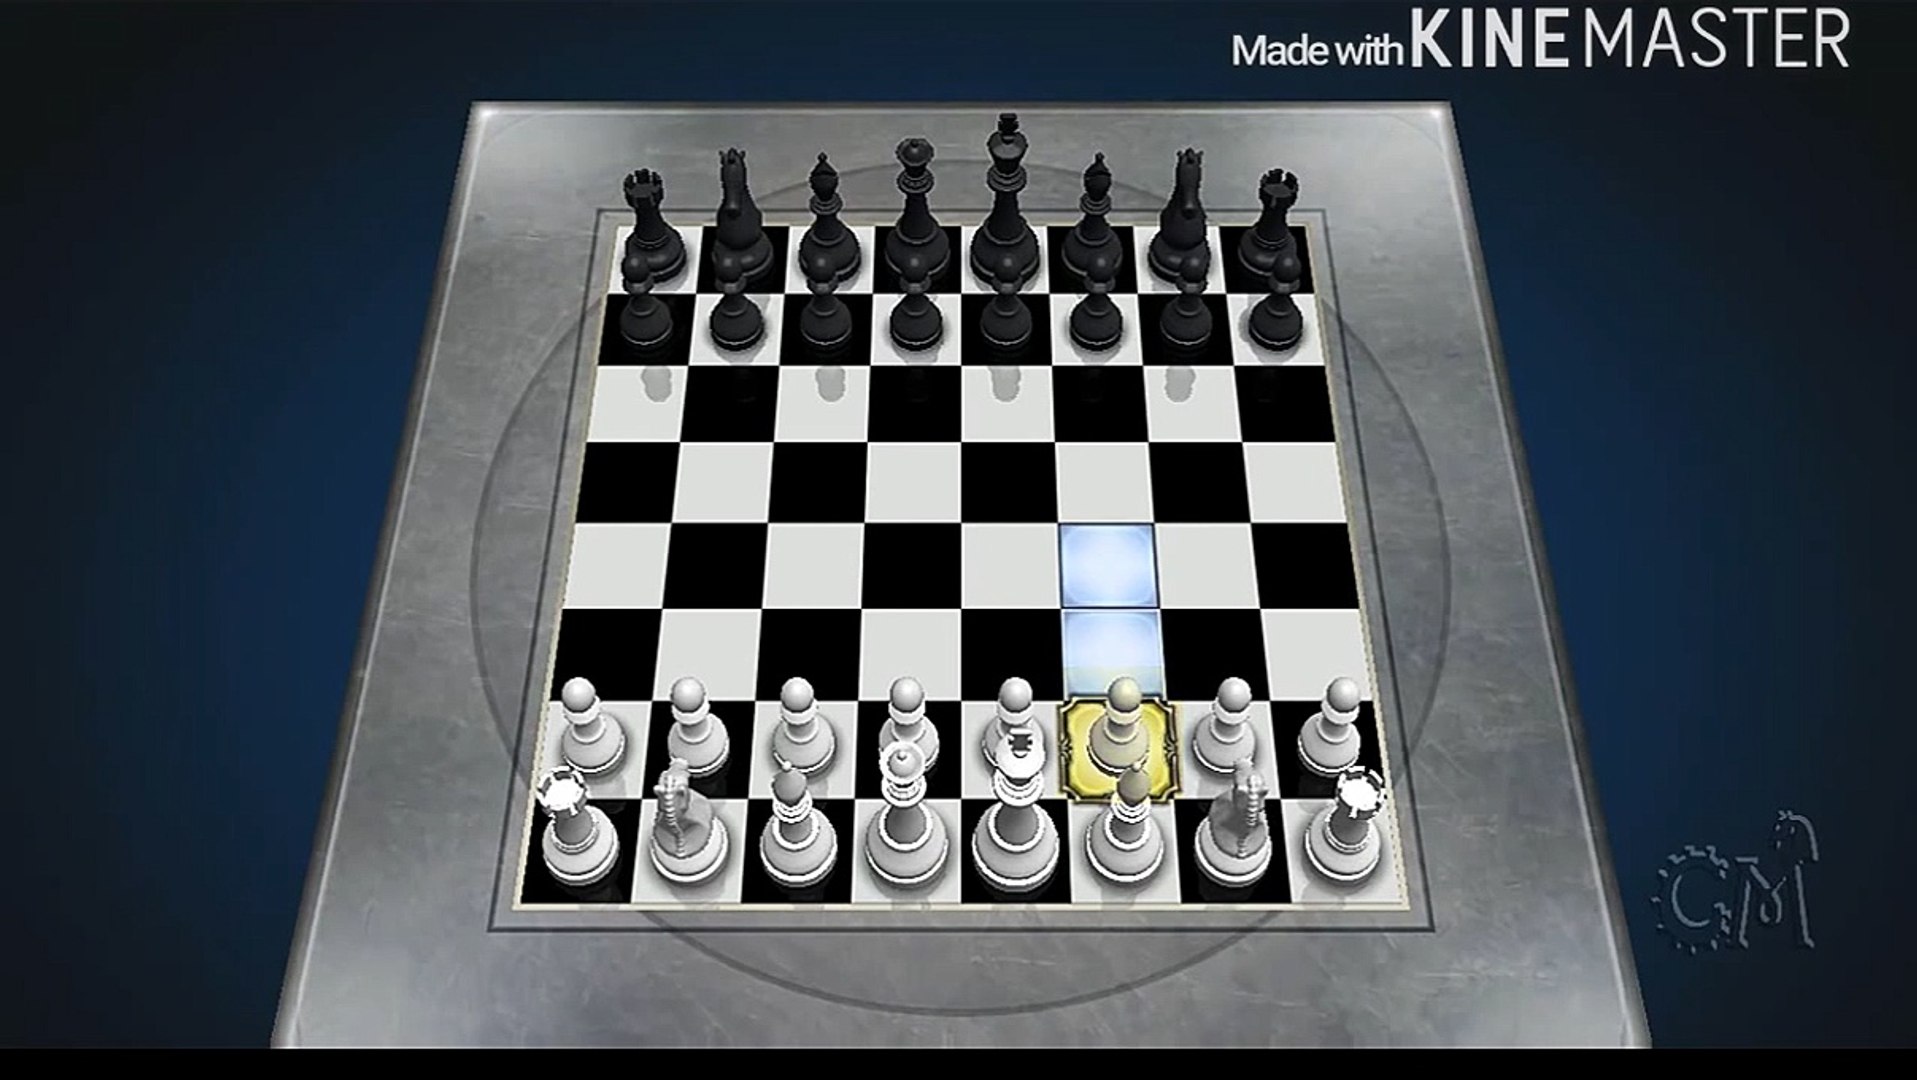 Chess is a game. Детский мат в шахматах в 4 хода. Детский мат в шахматах. Ходы для Chess Titans. Детский мат в шахматах в 3 хода.